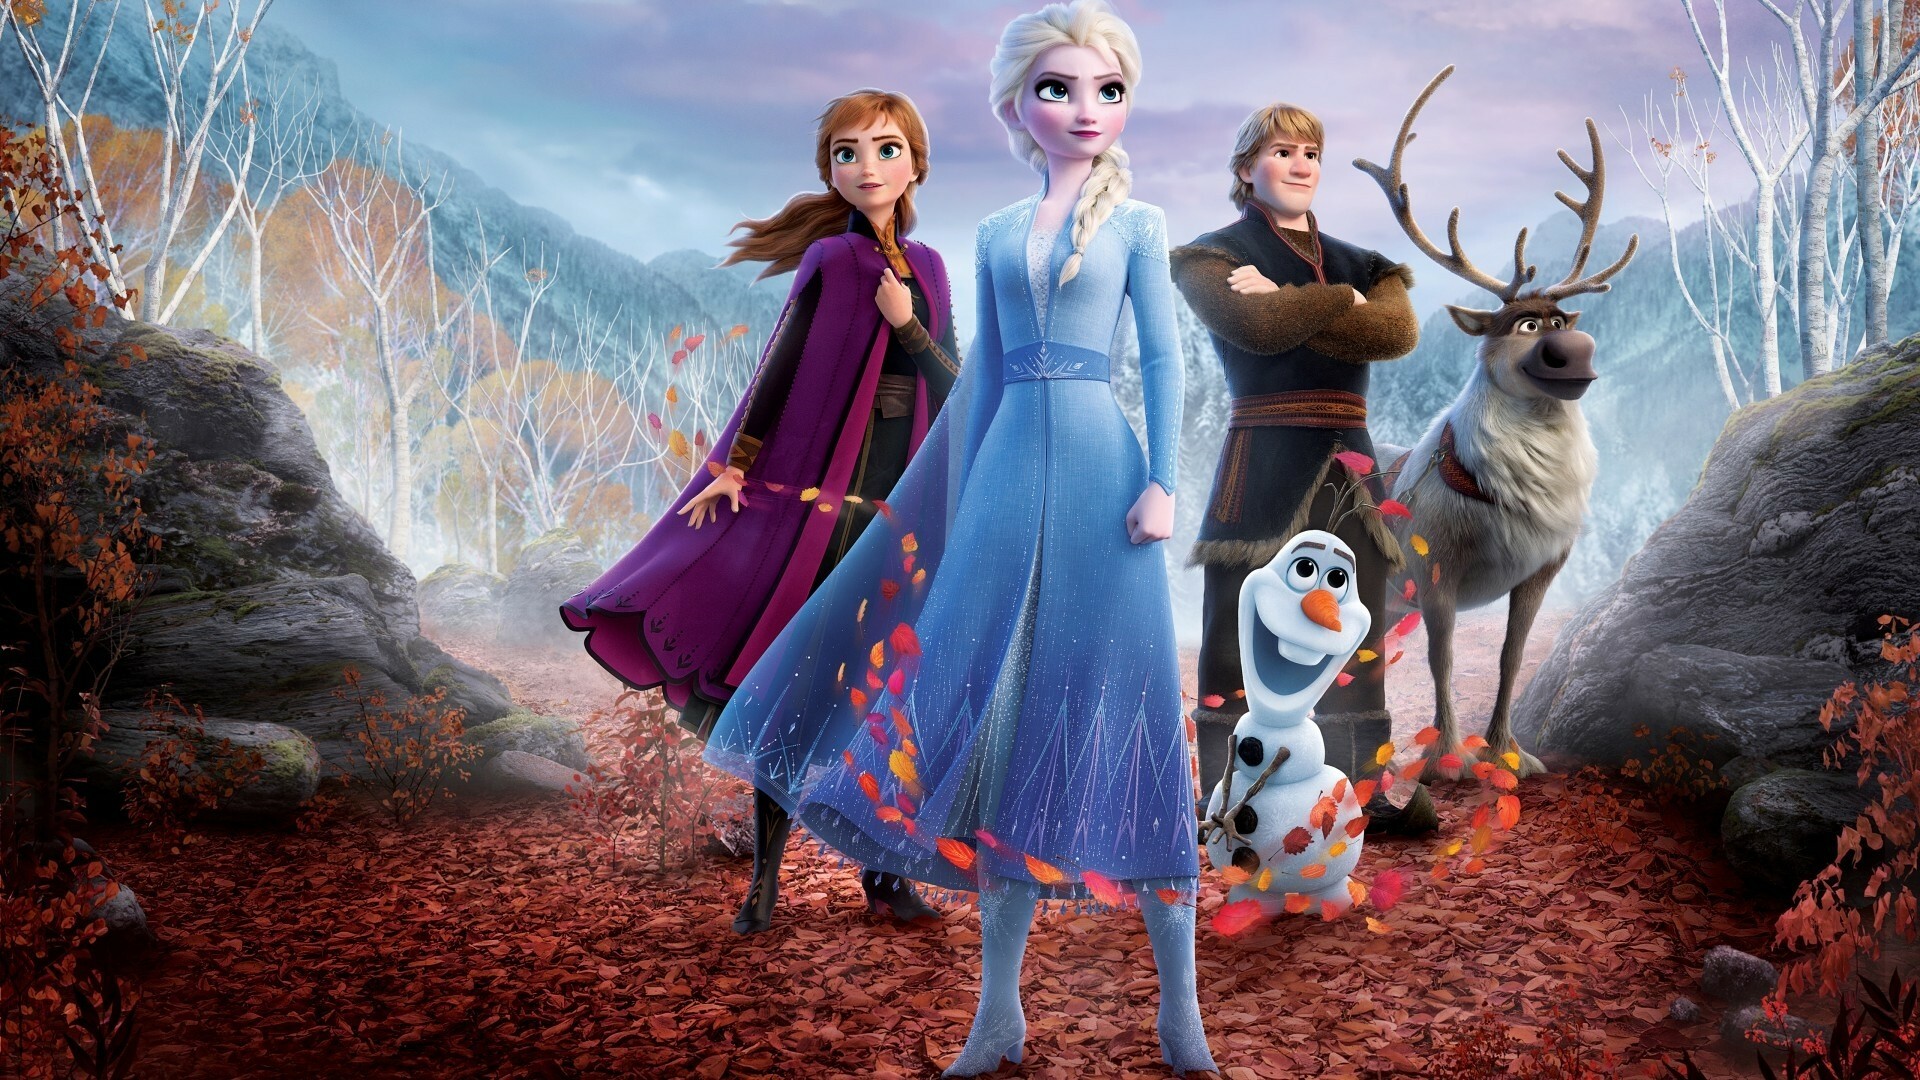 Frozen: Together with Anna, Kristoff, Olaf, and Sven, Elsa faces a dangerous but remarkable journey into Enchanted Forest. 1920x1080 Full HD Background.